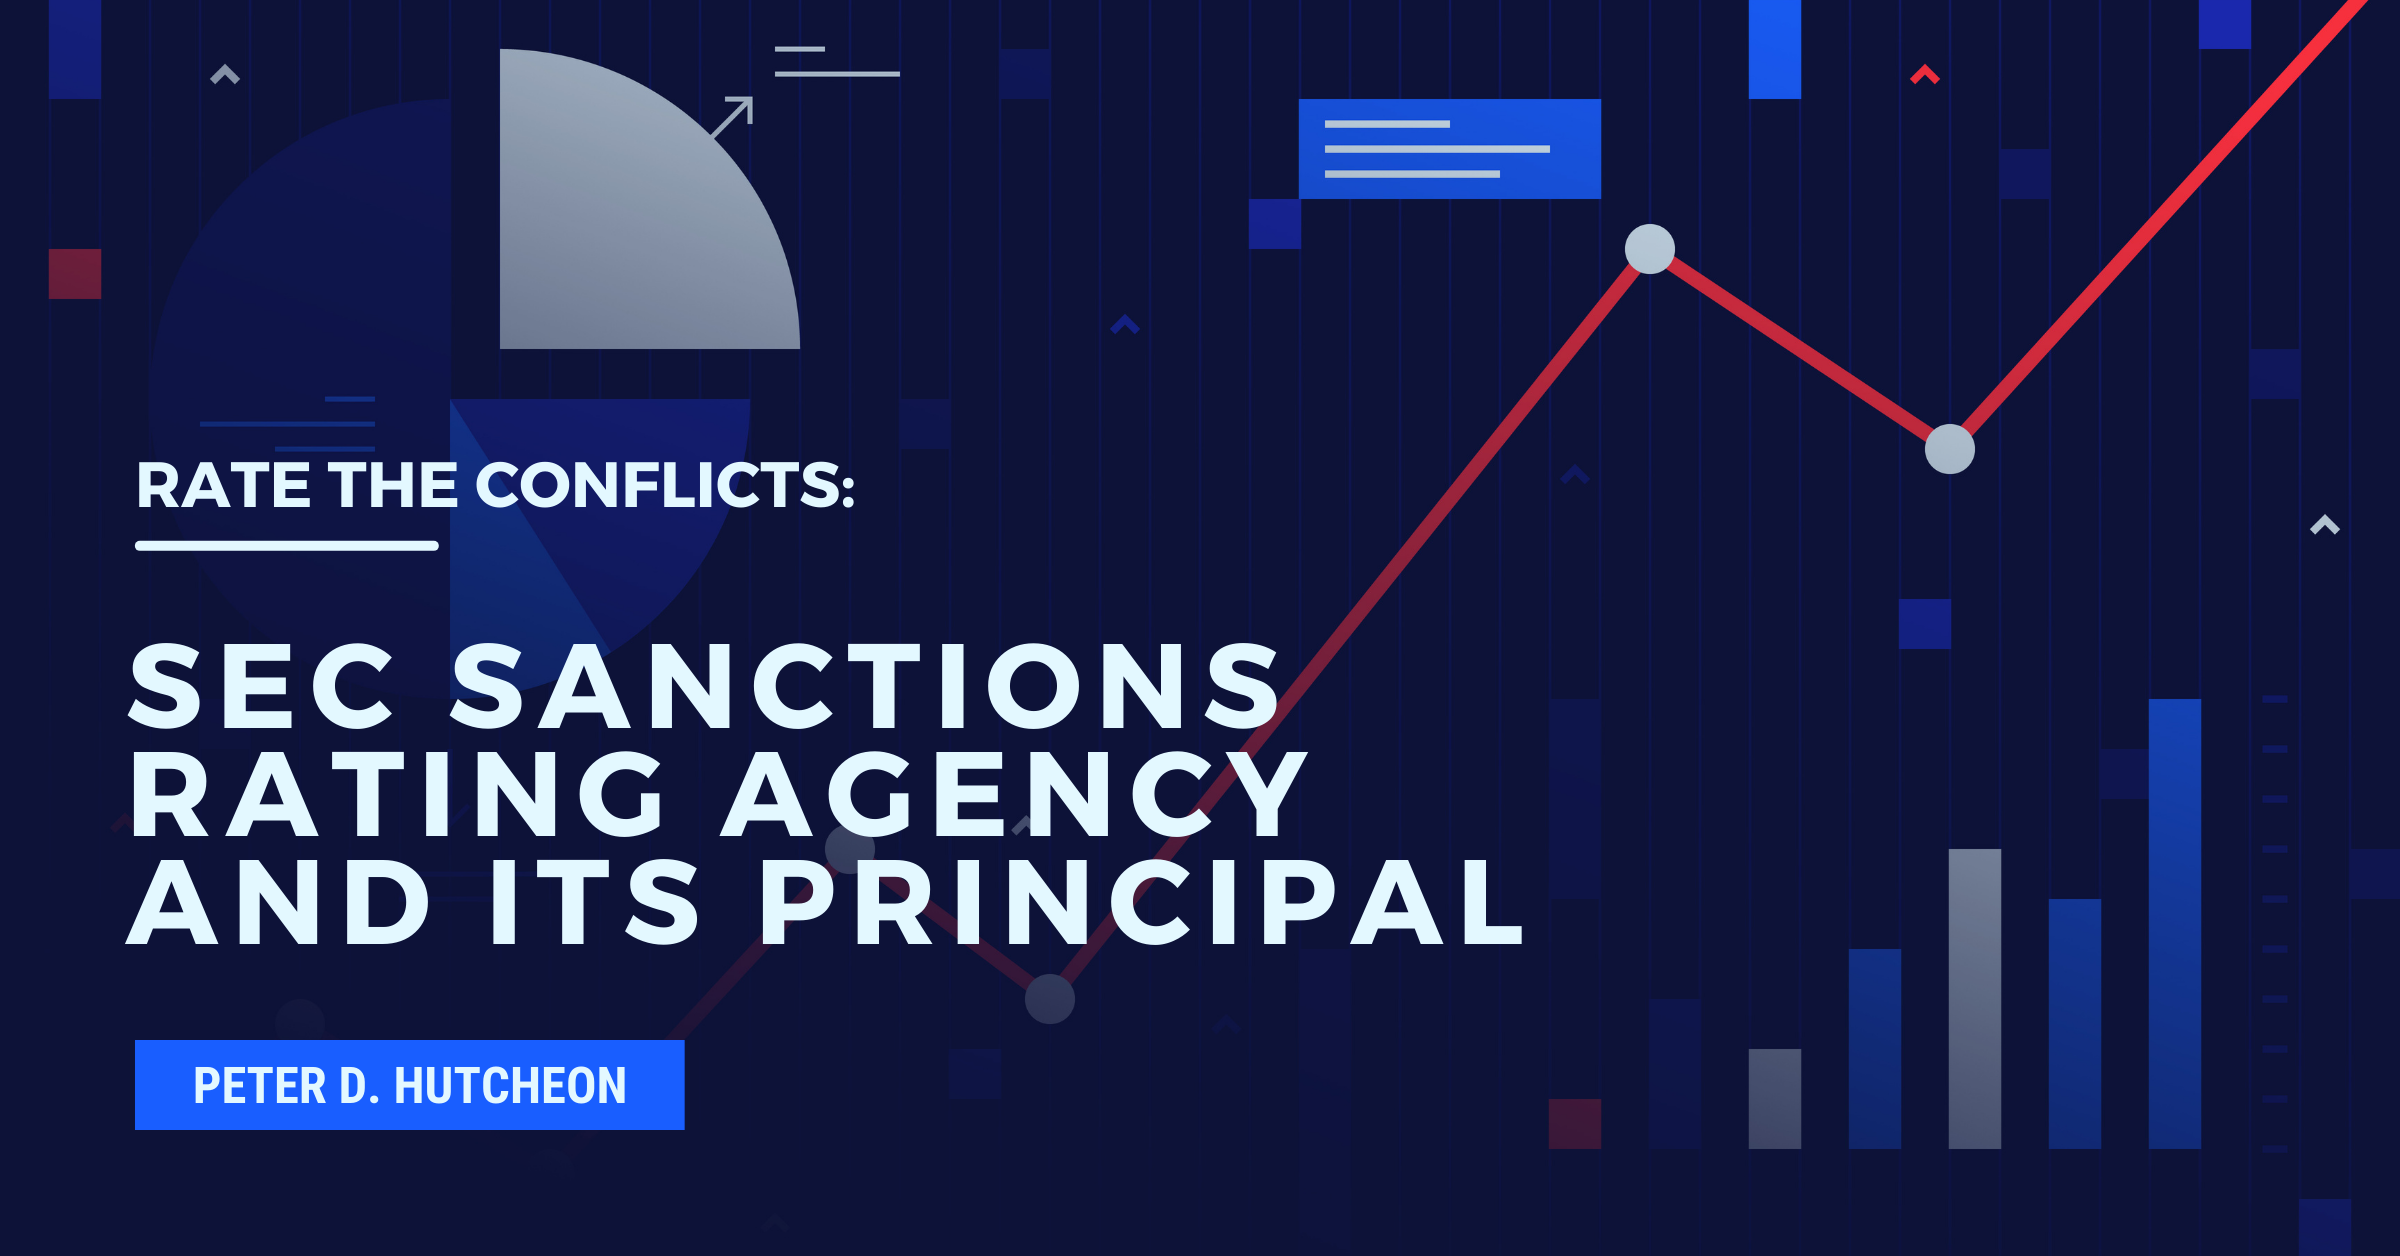 Rate the Conflicts: SEC Sanctions Rating Agency and its Principal